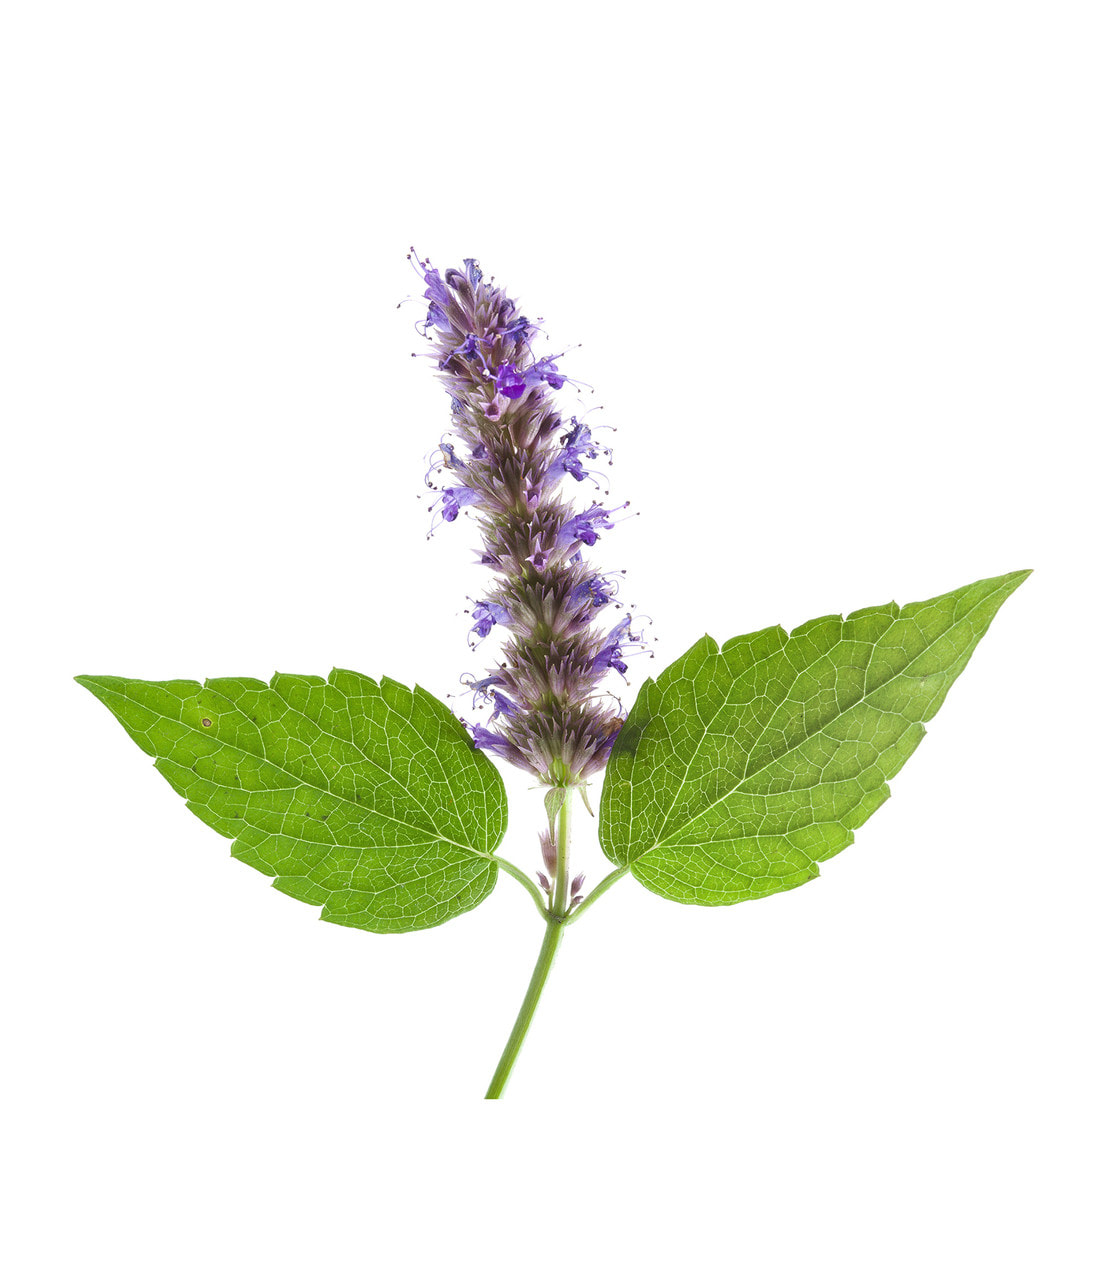 In India, patchouli was considered to be a sacred plant and was used in religious rituals